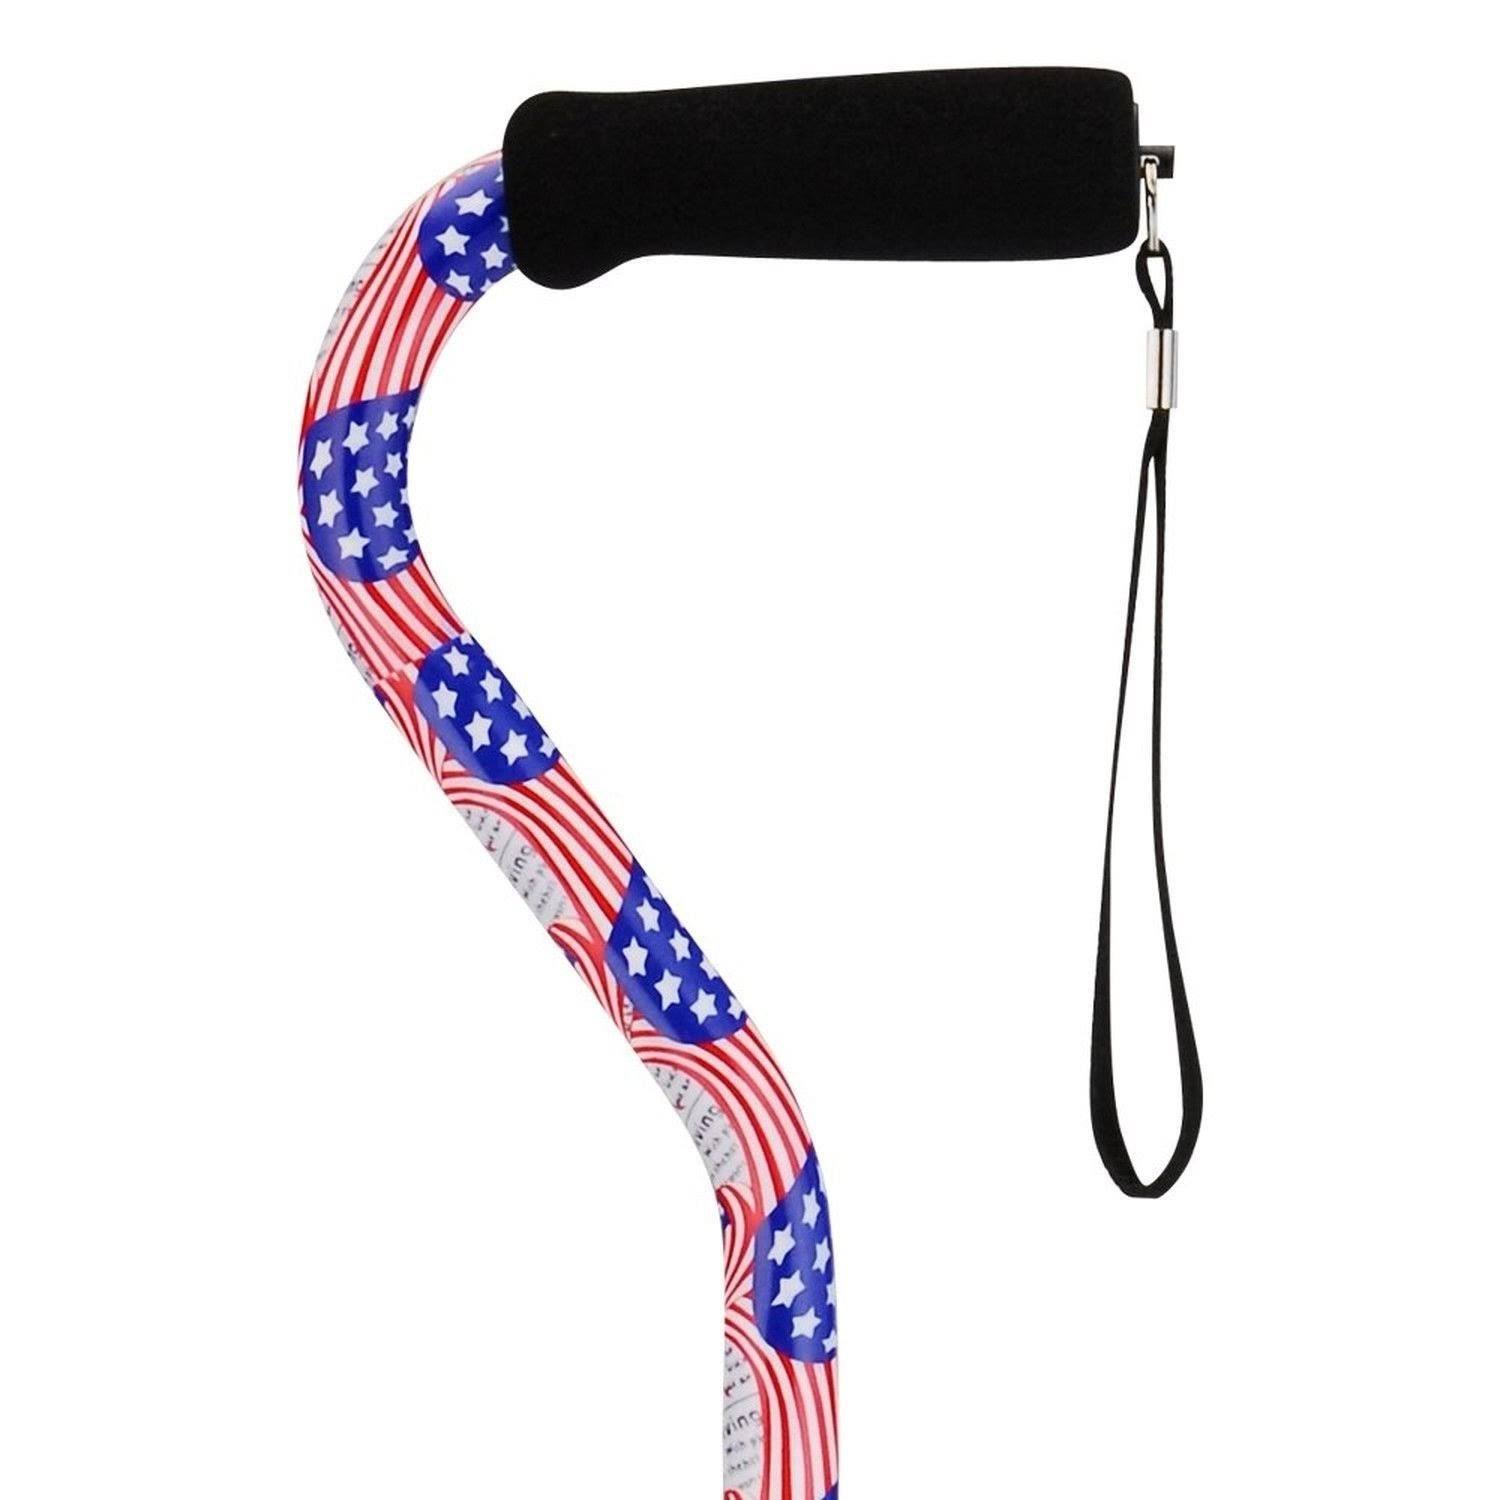 Nova Medical Products with Offset Handle Designer Cane - Stars and Stripes